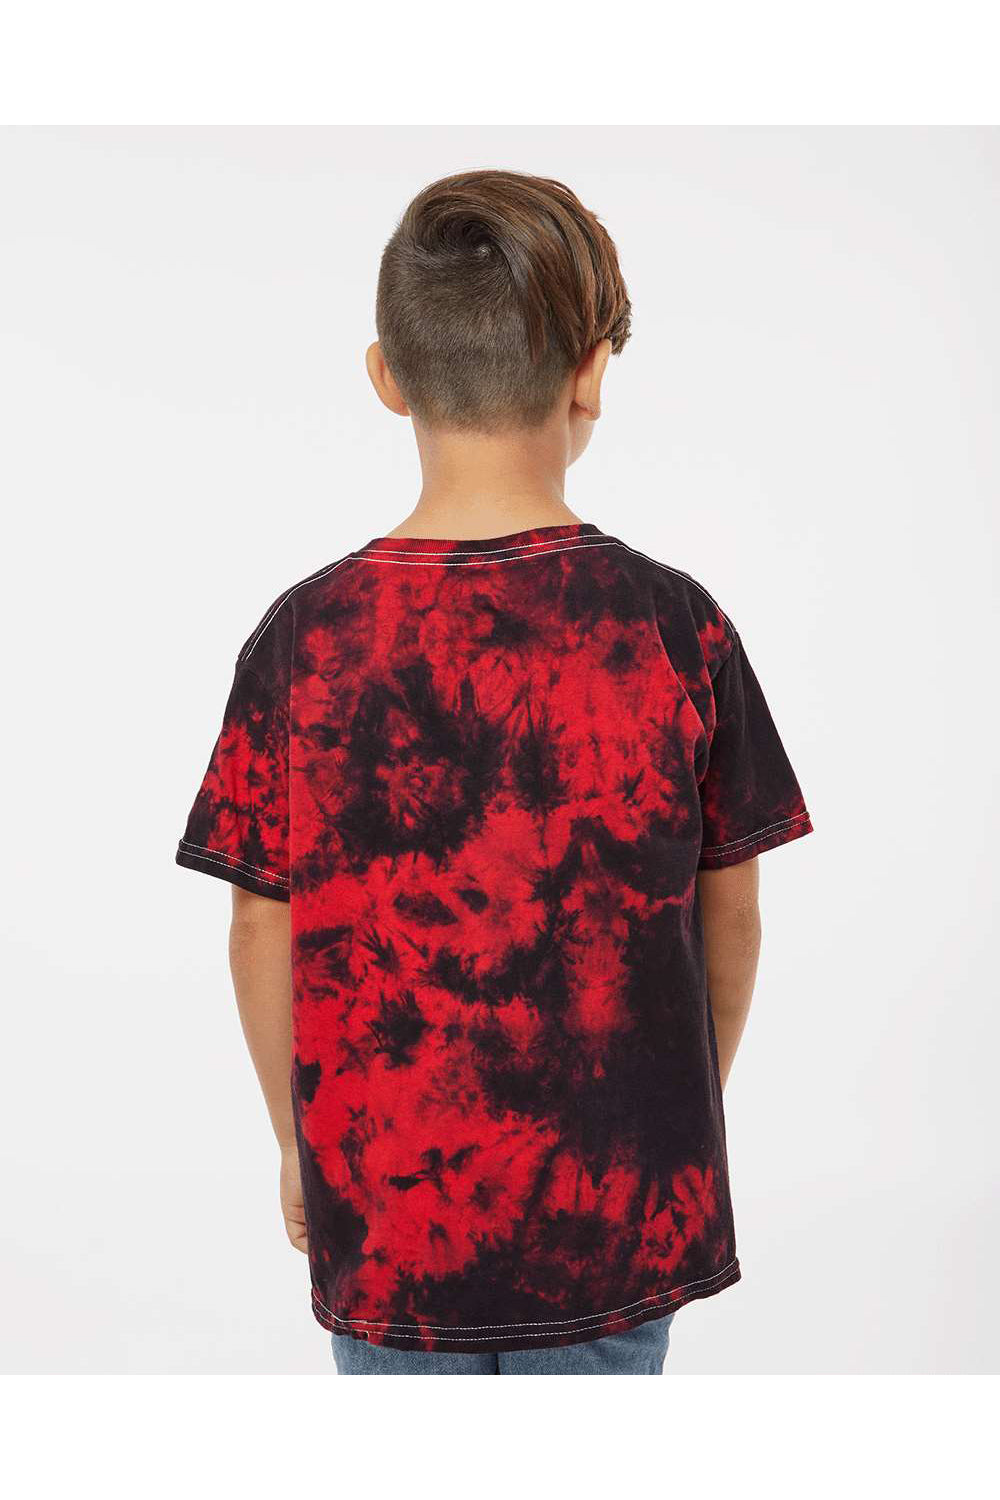 Dyenomite 20BCR Youth Crystal Tie Dyed Short Sleeve Crewneck T-Shirt Black/Red Crystal Model Back